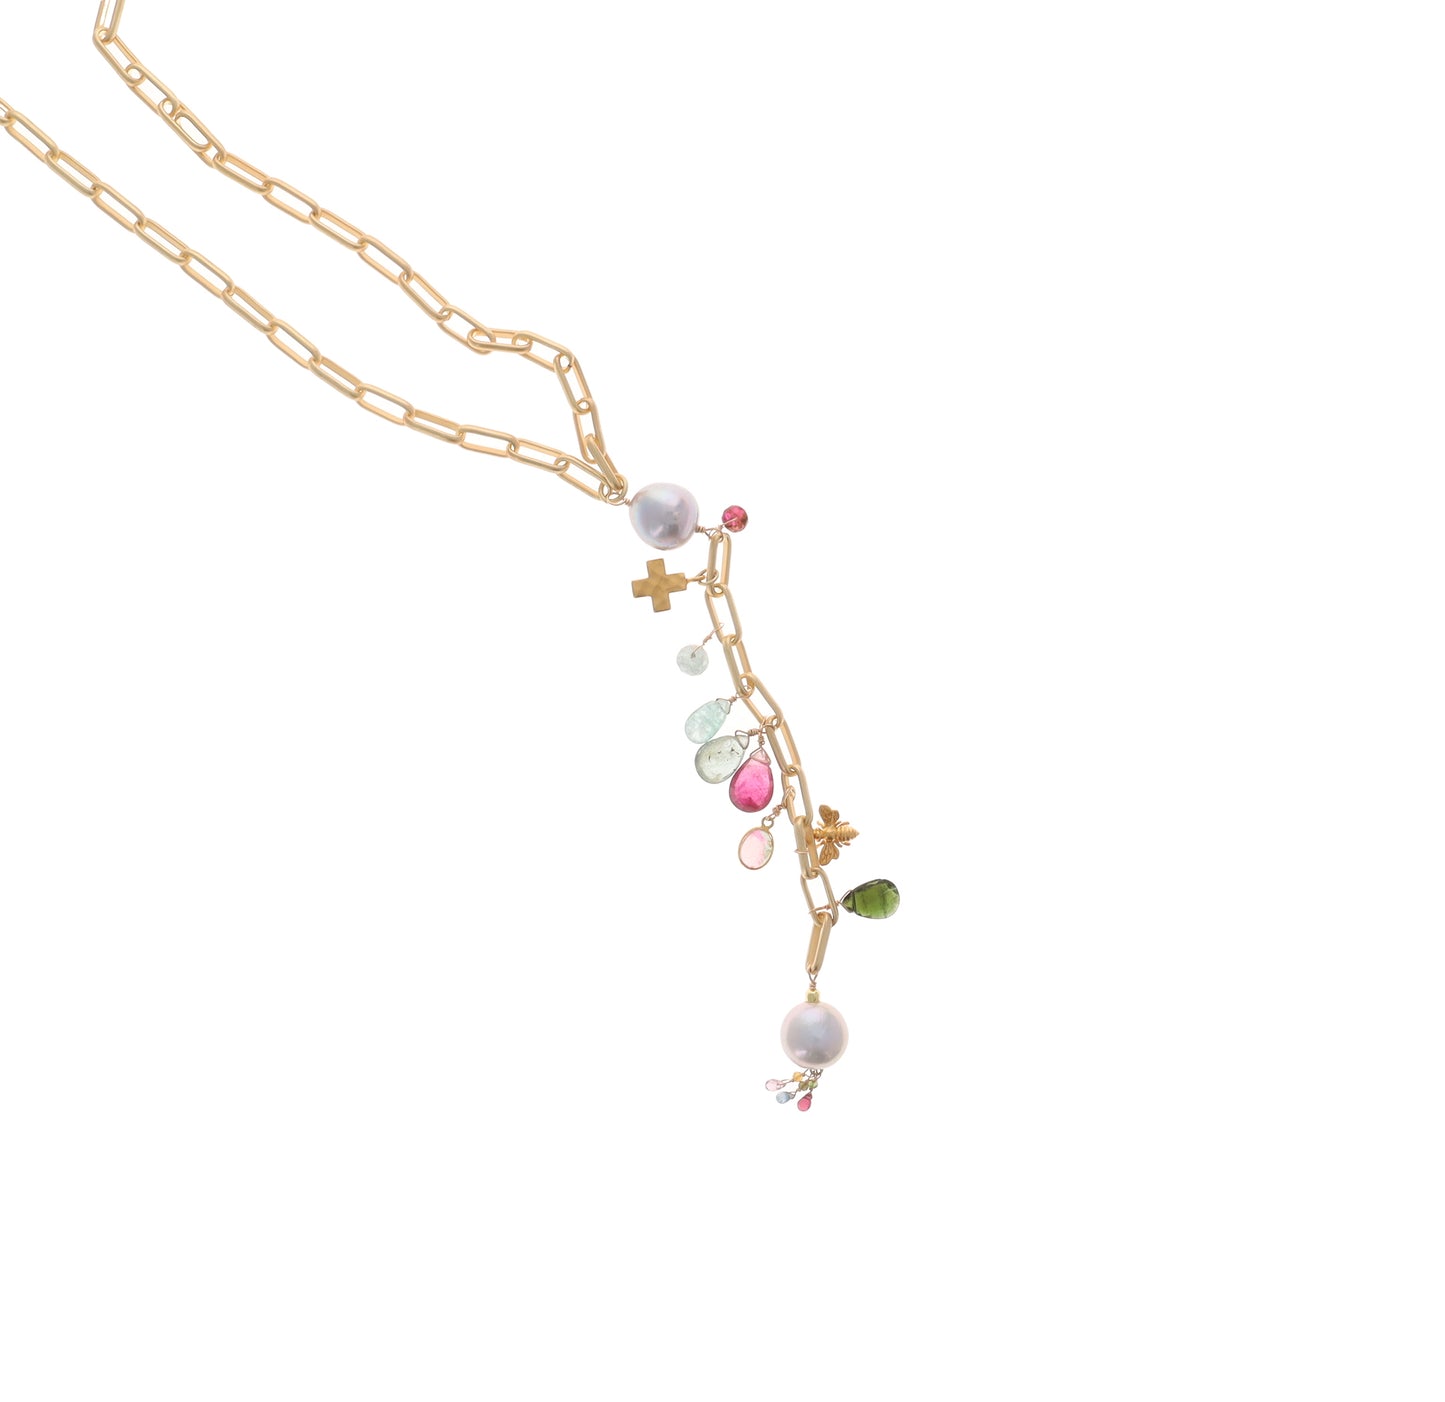 Heavy Paperclip Link Necklace with Tourmaline Drops